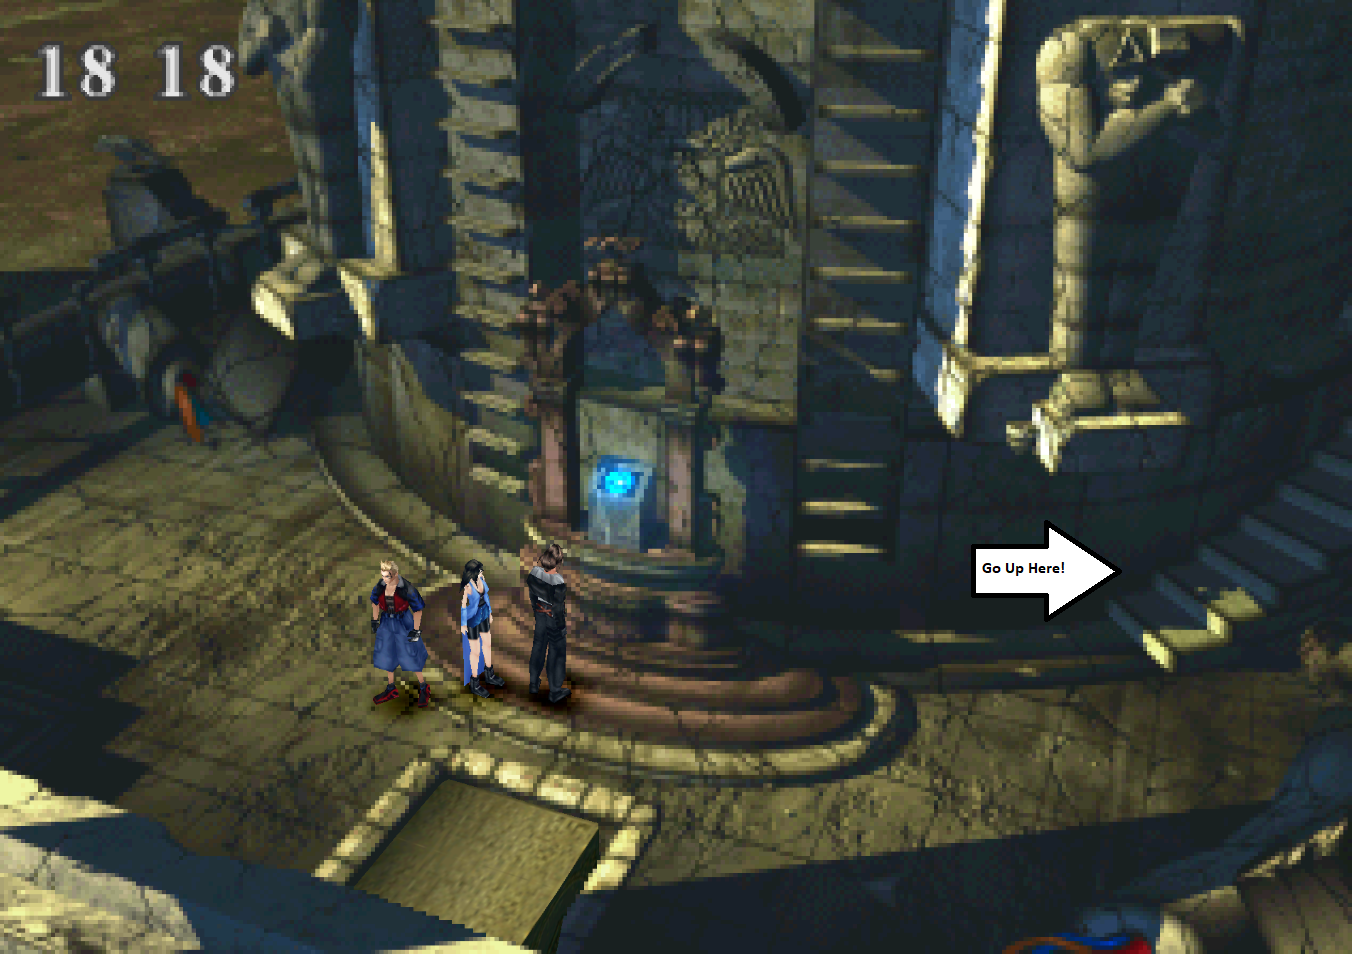 Examine Orb for Revealed Staircase